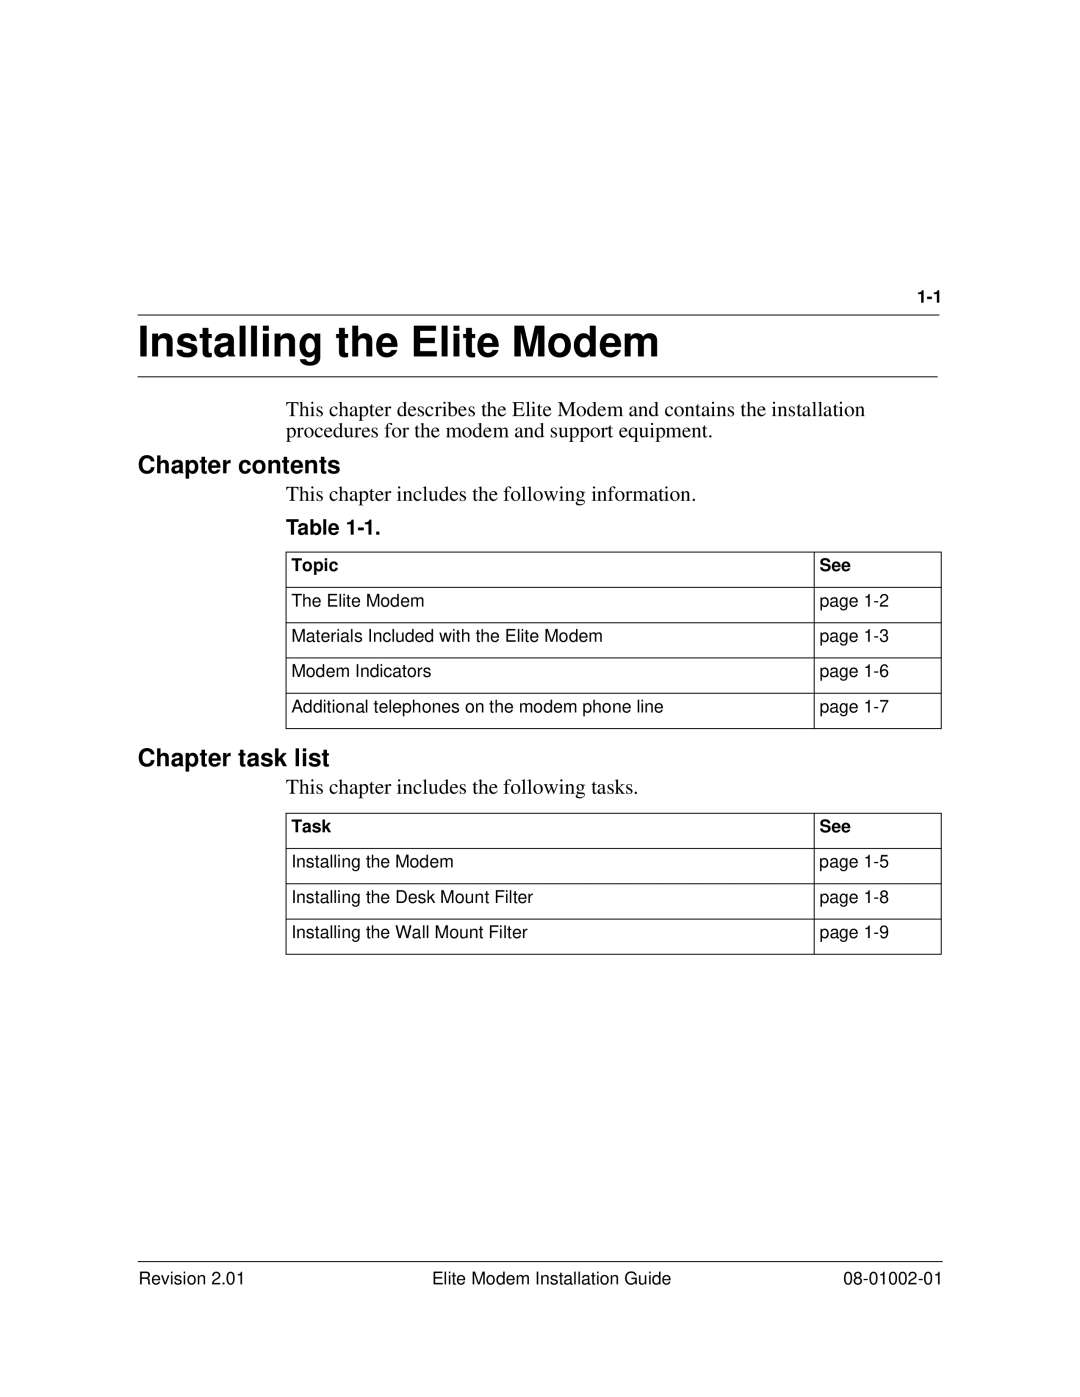 Zhone Technologies 08-01002-01 manual Installing the Elite Modem, Chapter contents, Chapter task list 